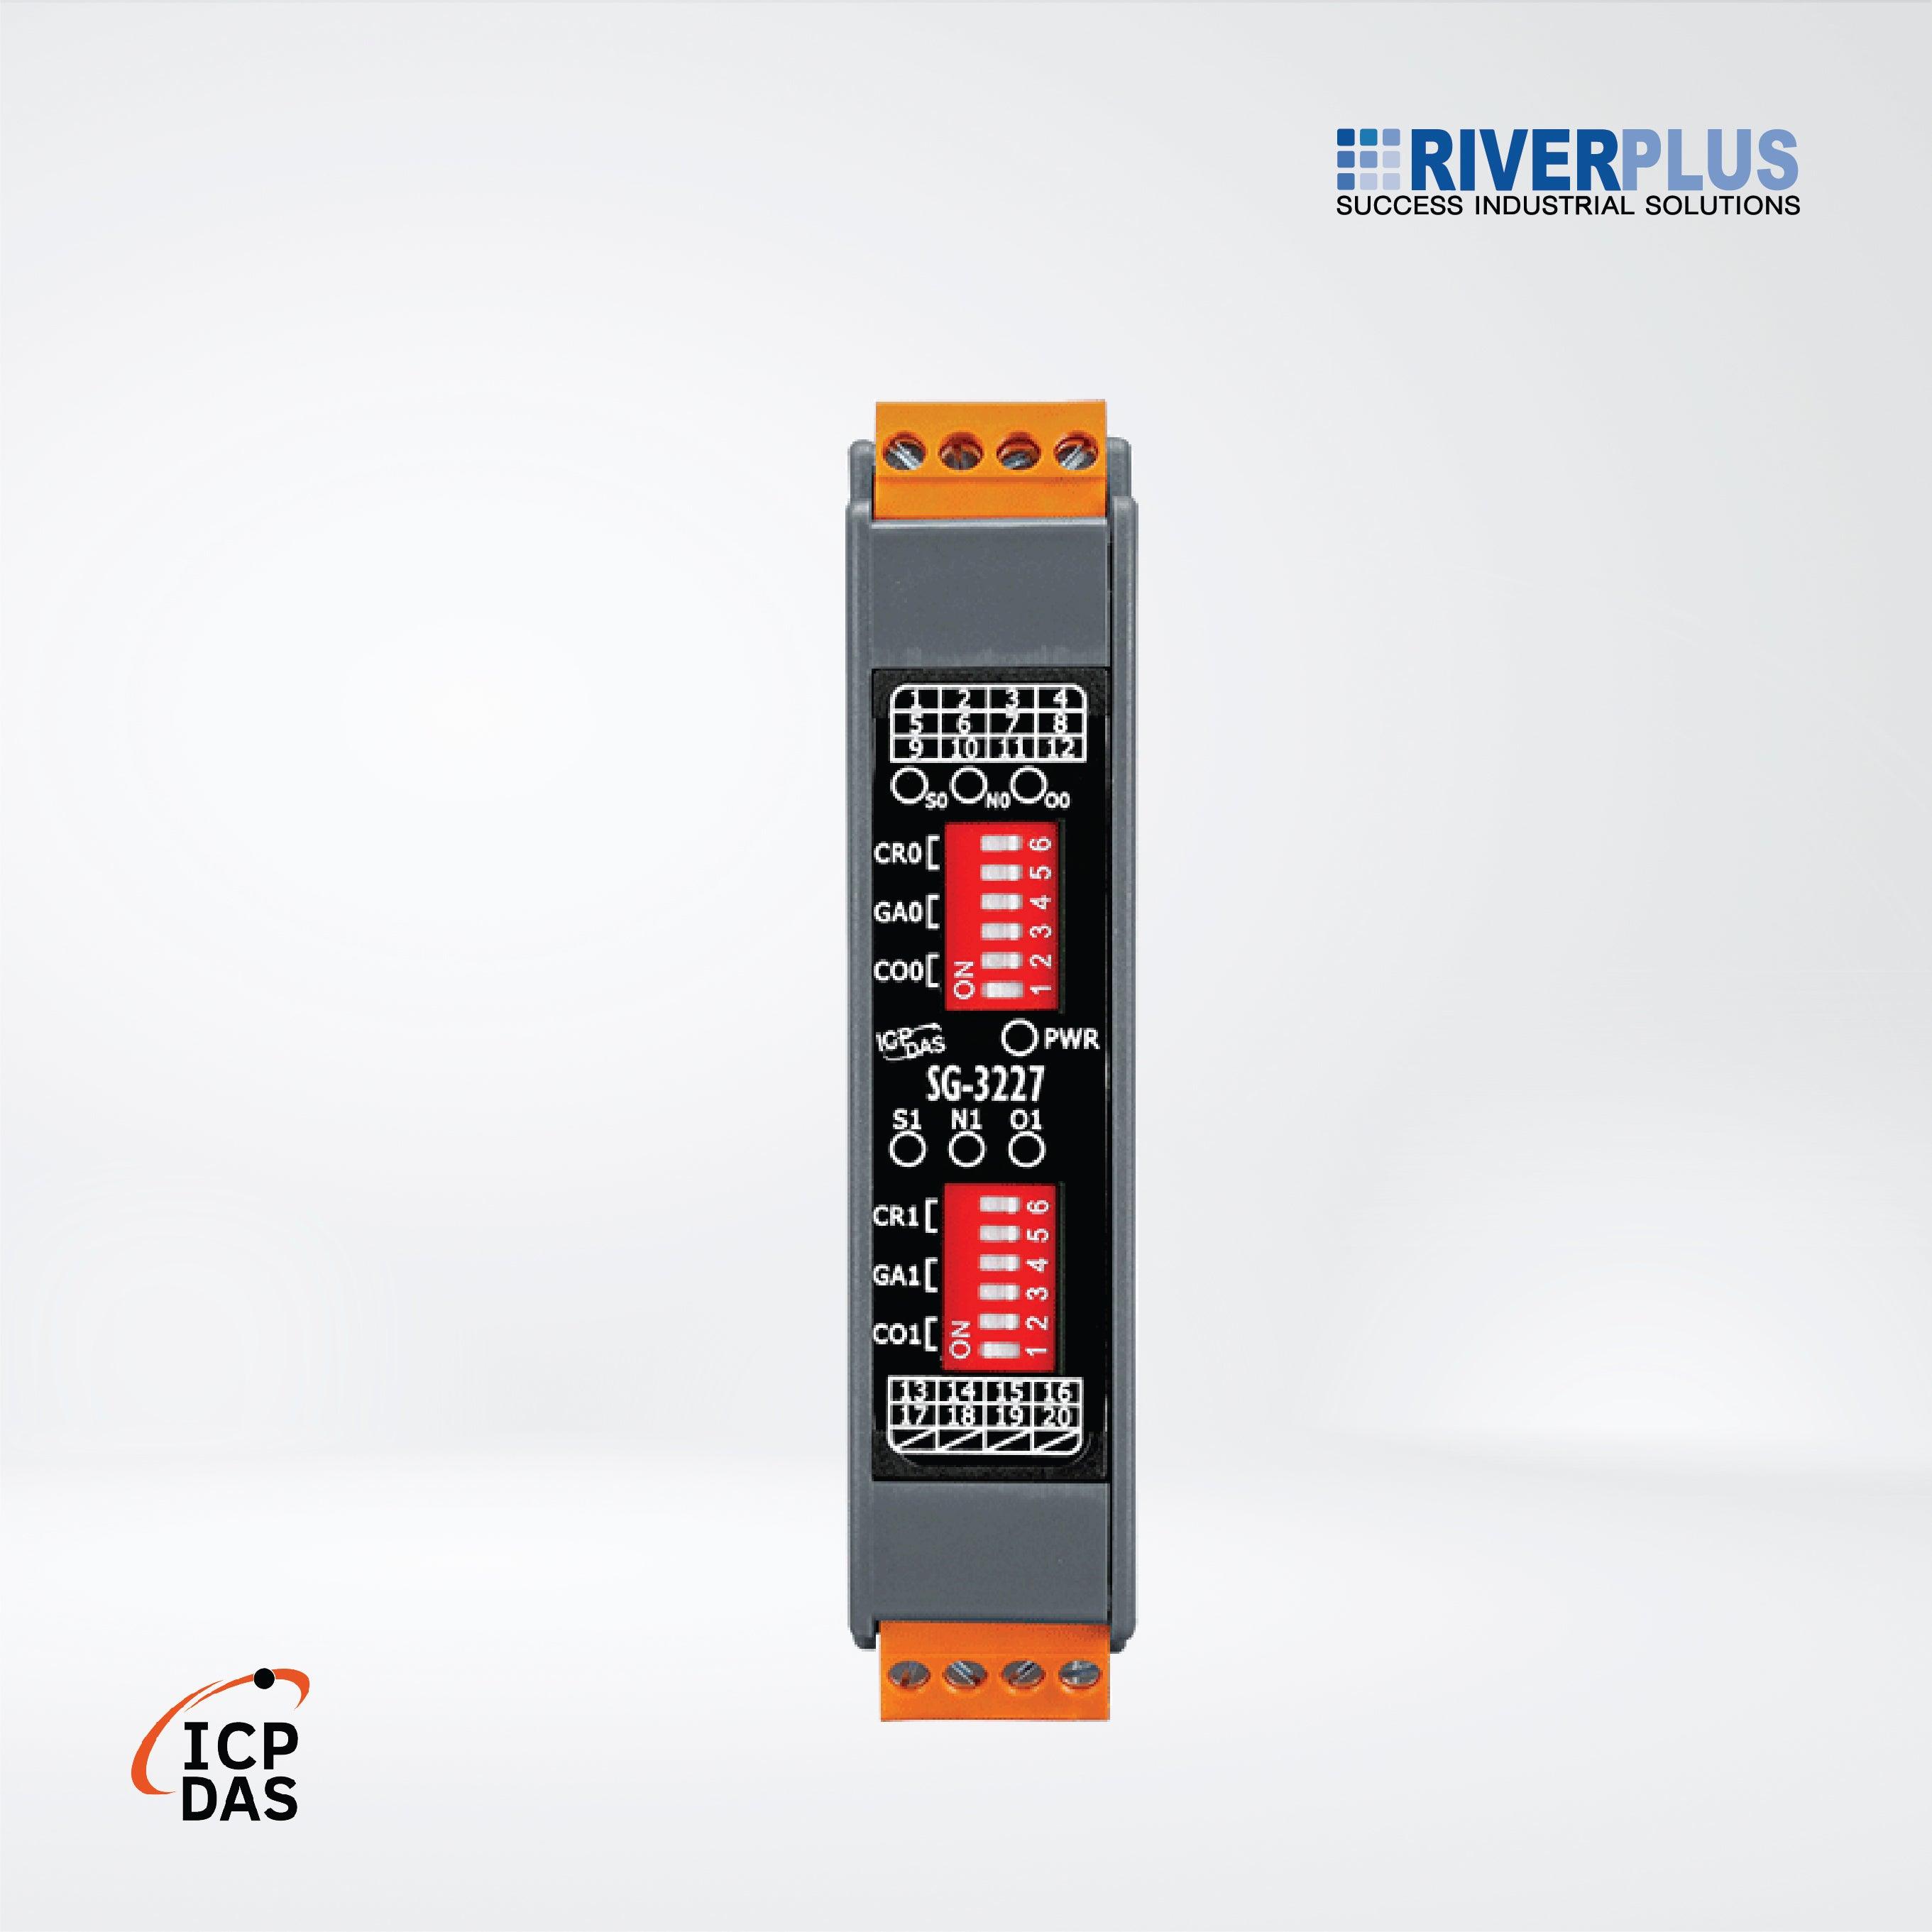 SG-3227 2-channel IEPE Input Signal Conditioner - Riverplus